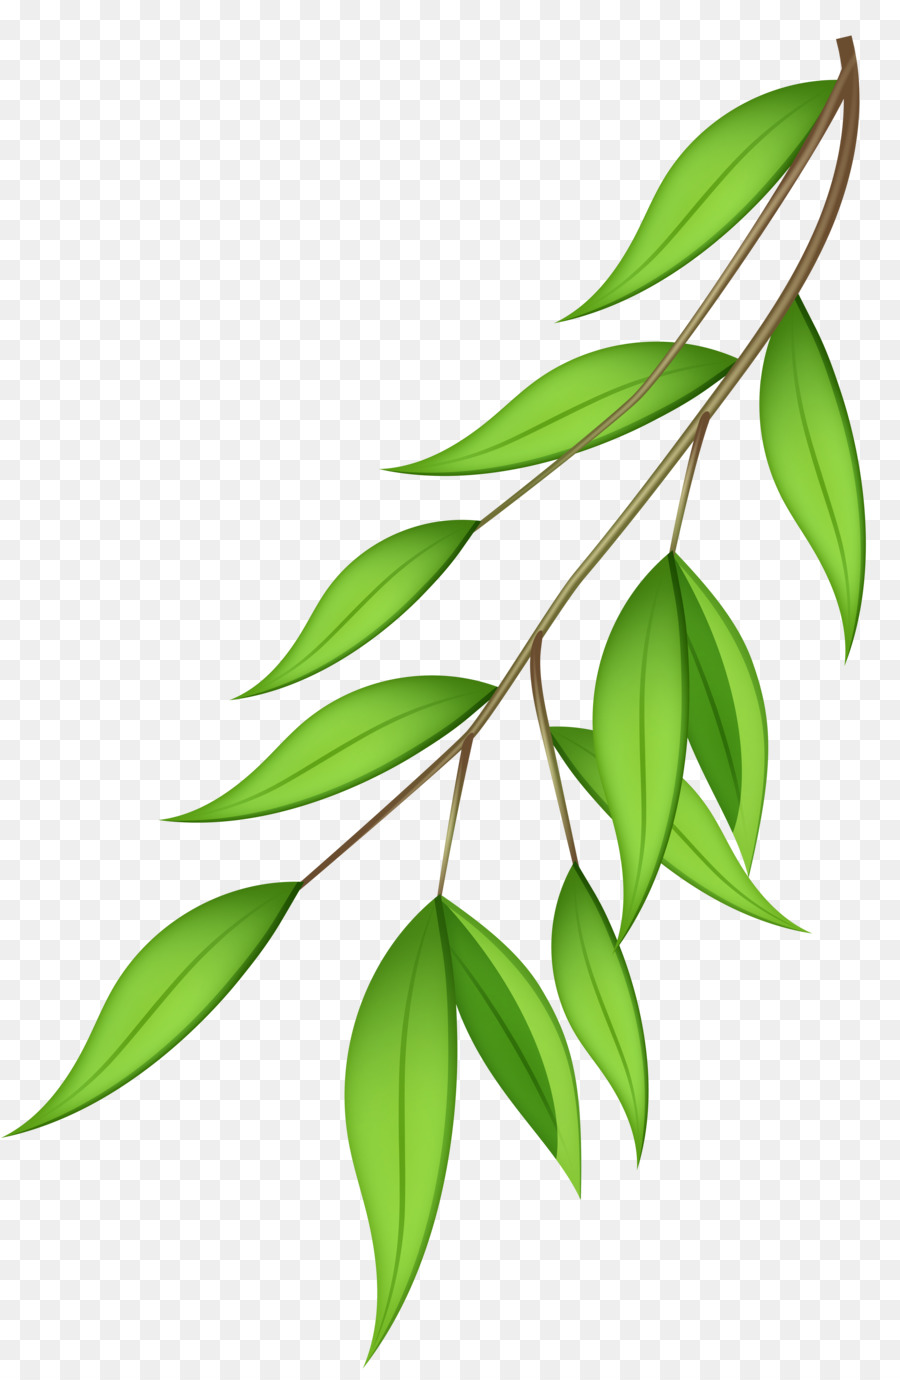 Branch Tree Clip art - Green Branch Cliparts png download - 5256*8000 - Free Transparent Branch png Download.